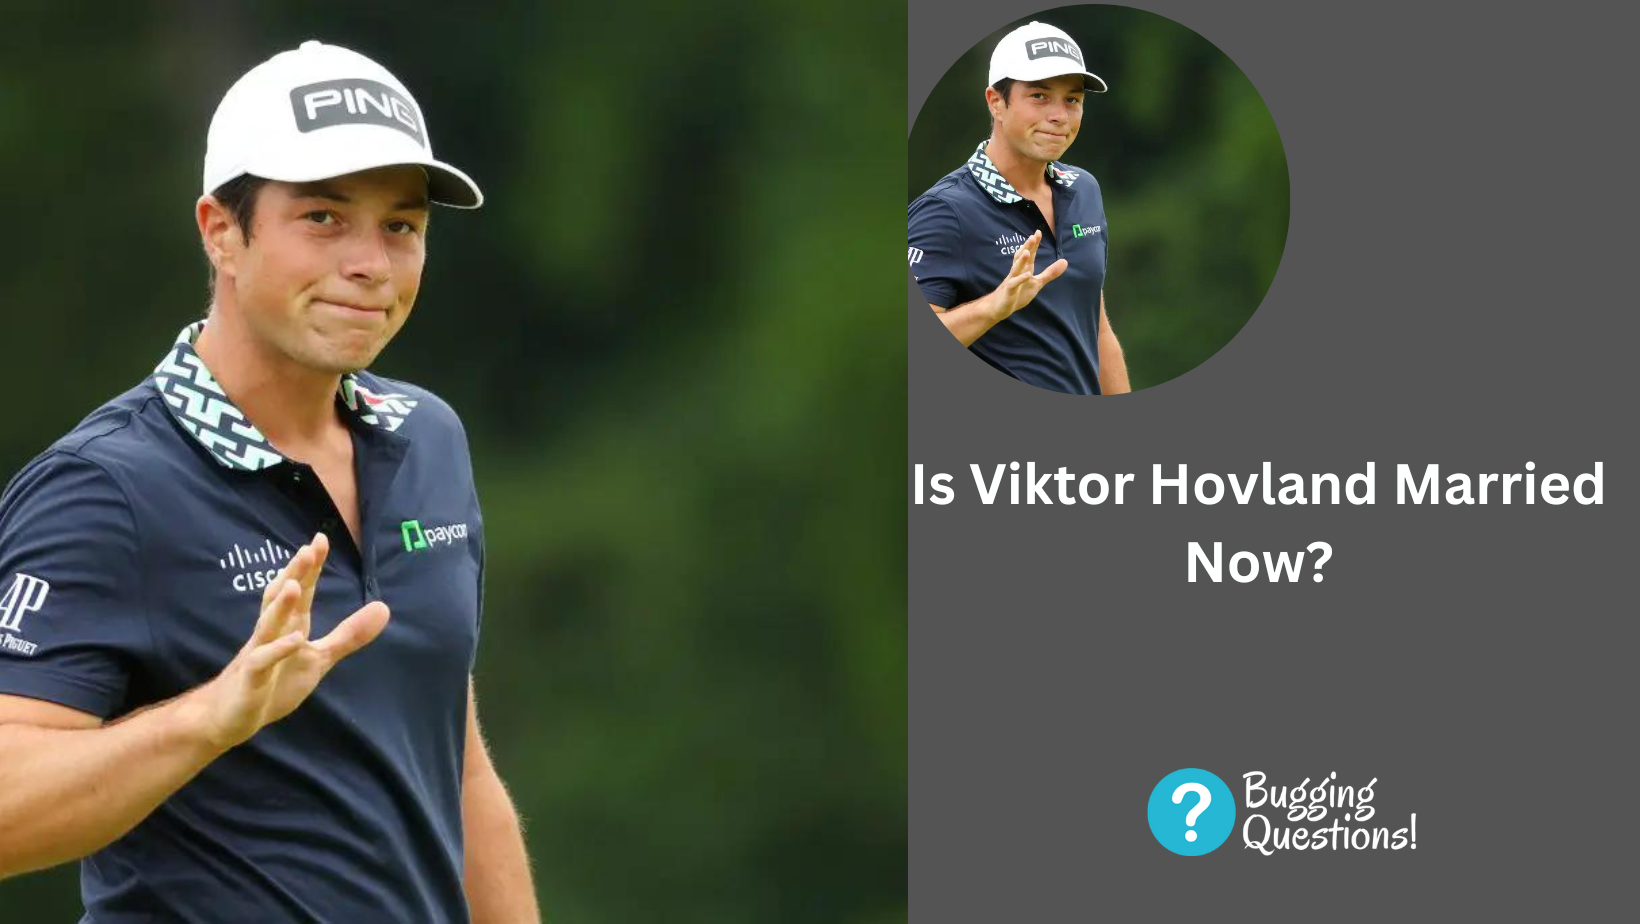 Is Viktor Hovland Married Now?